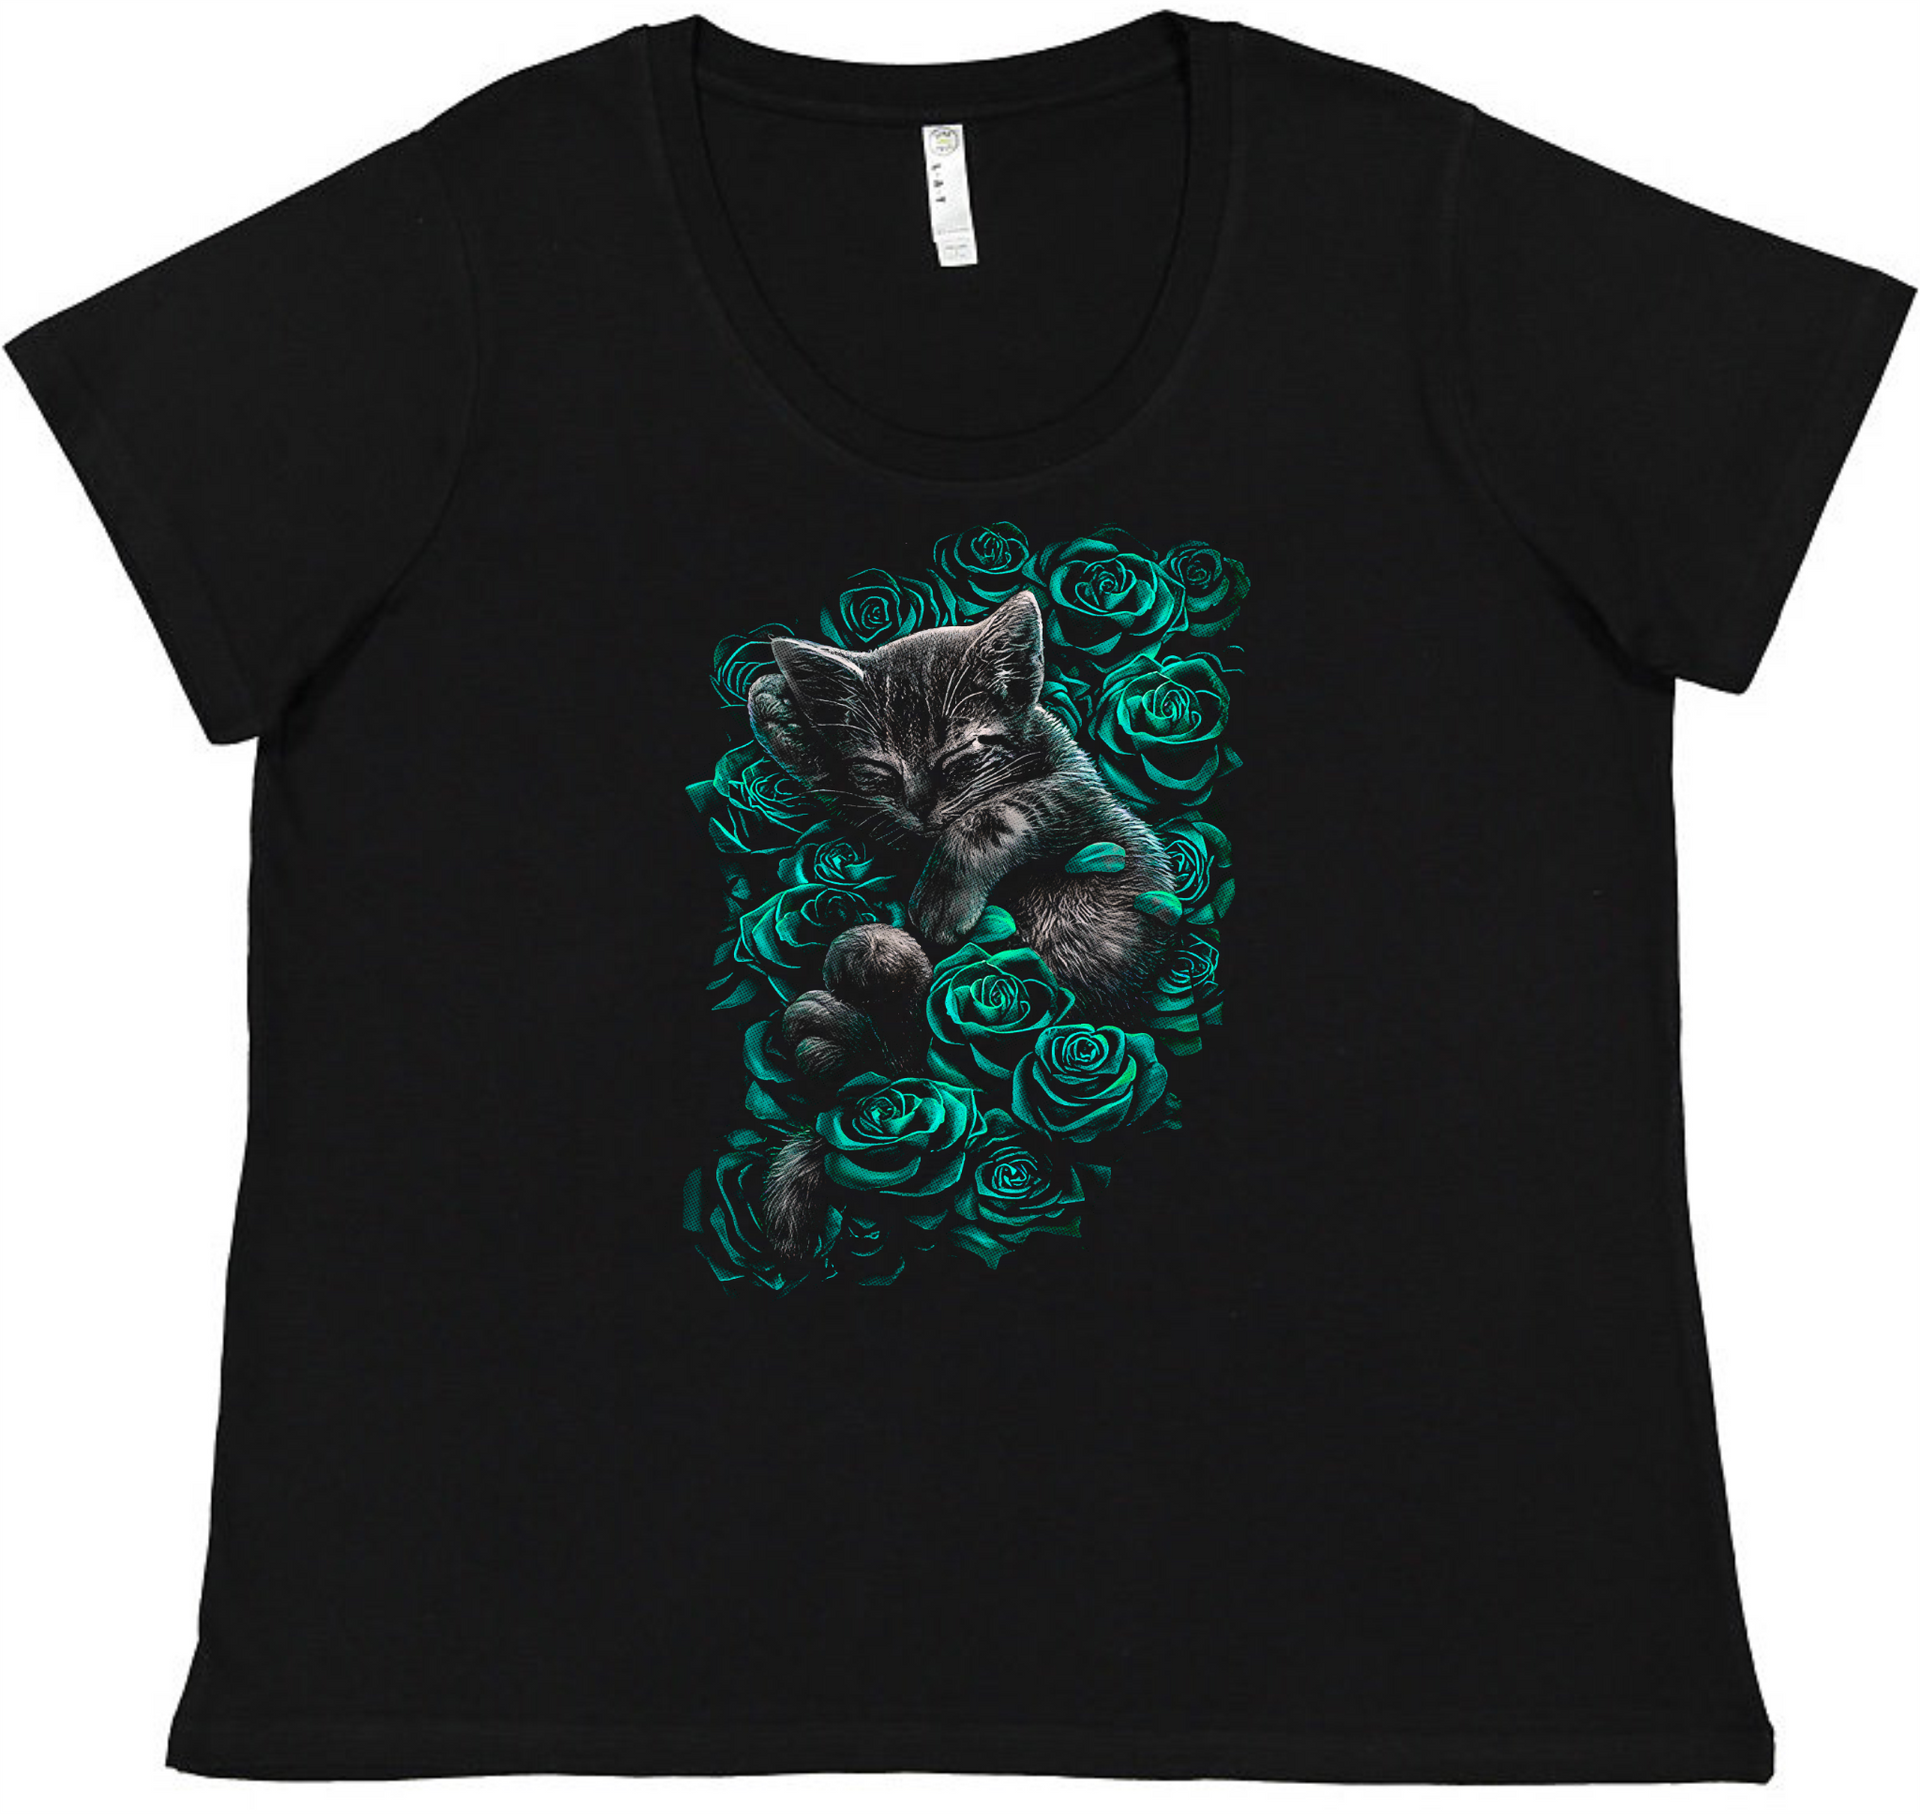 Kitty and Roses Ladies Tee Ladies Shirt by Akron Pride Custom Tees | Akron Pride Custom Tees